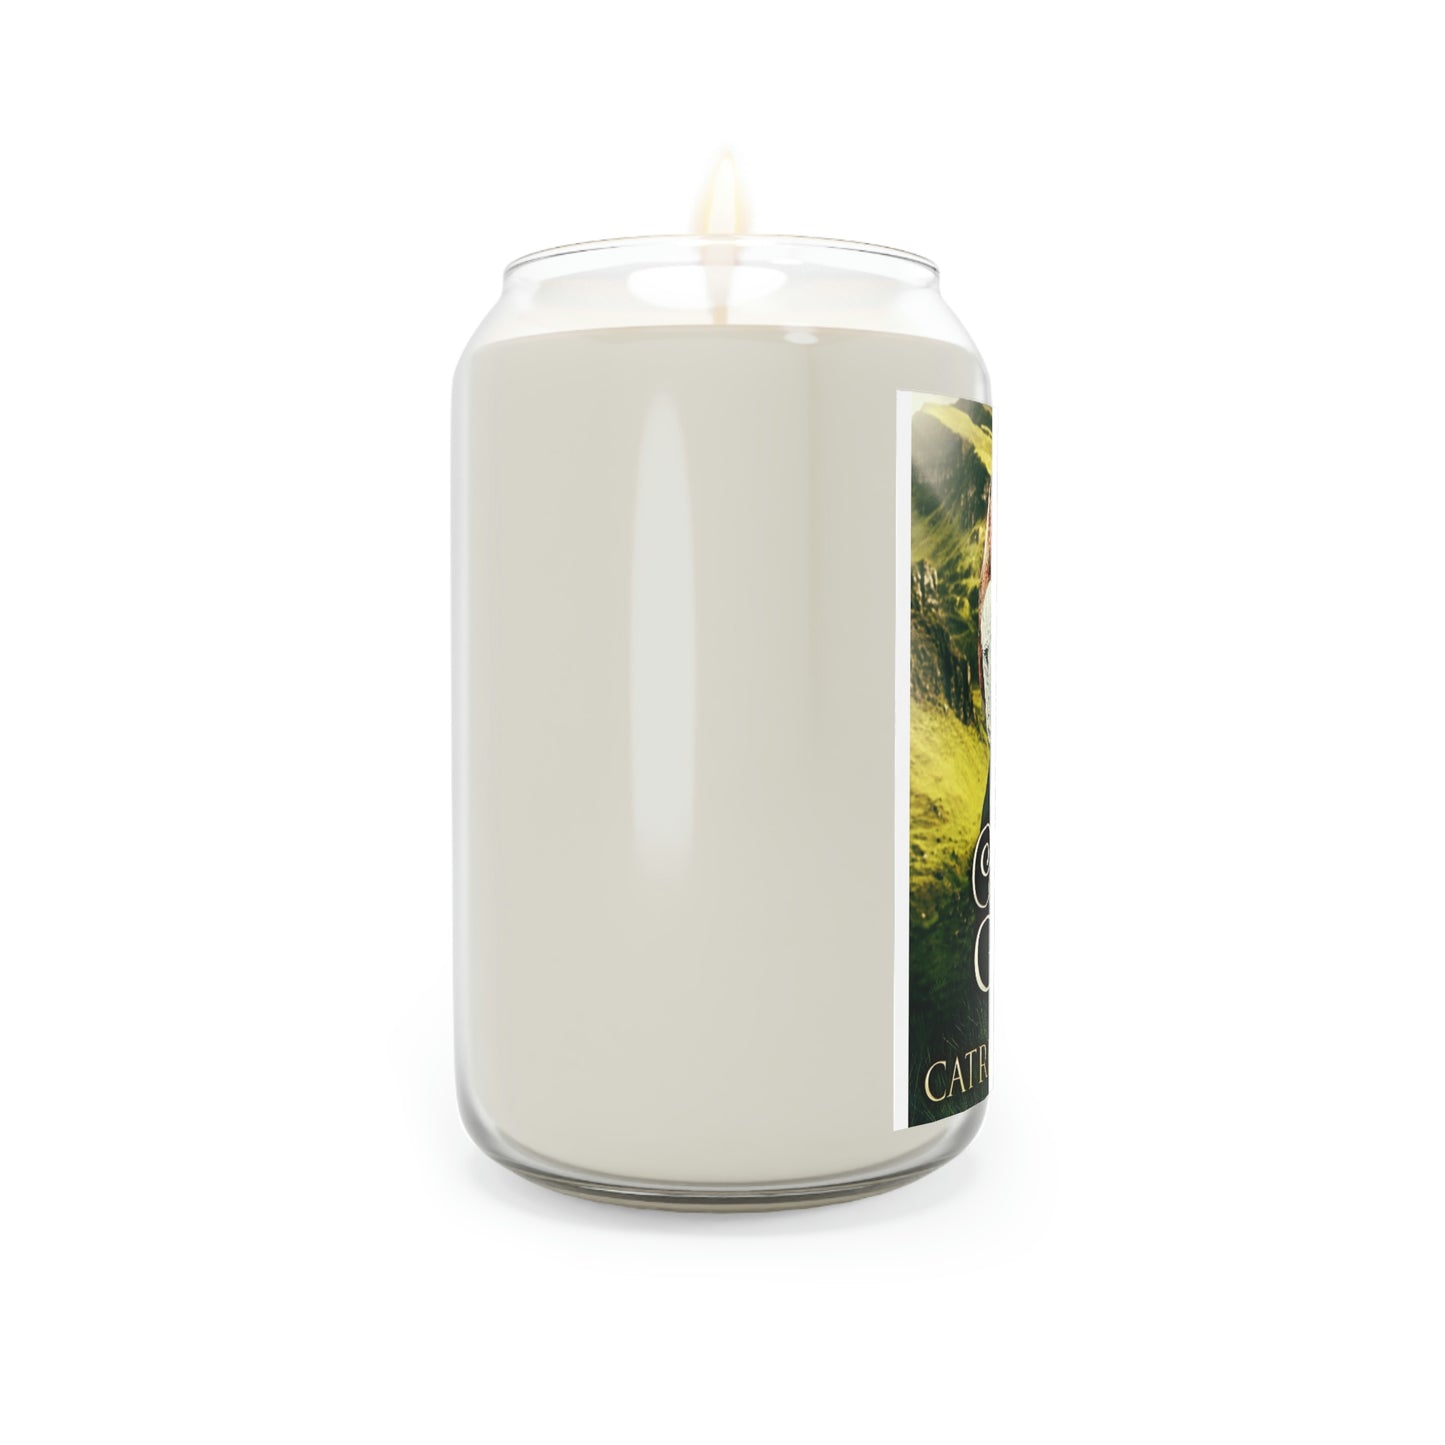 Fiona Of The Glen - Scented Candle